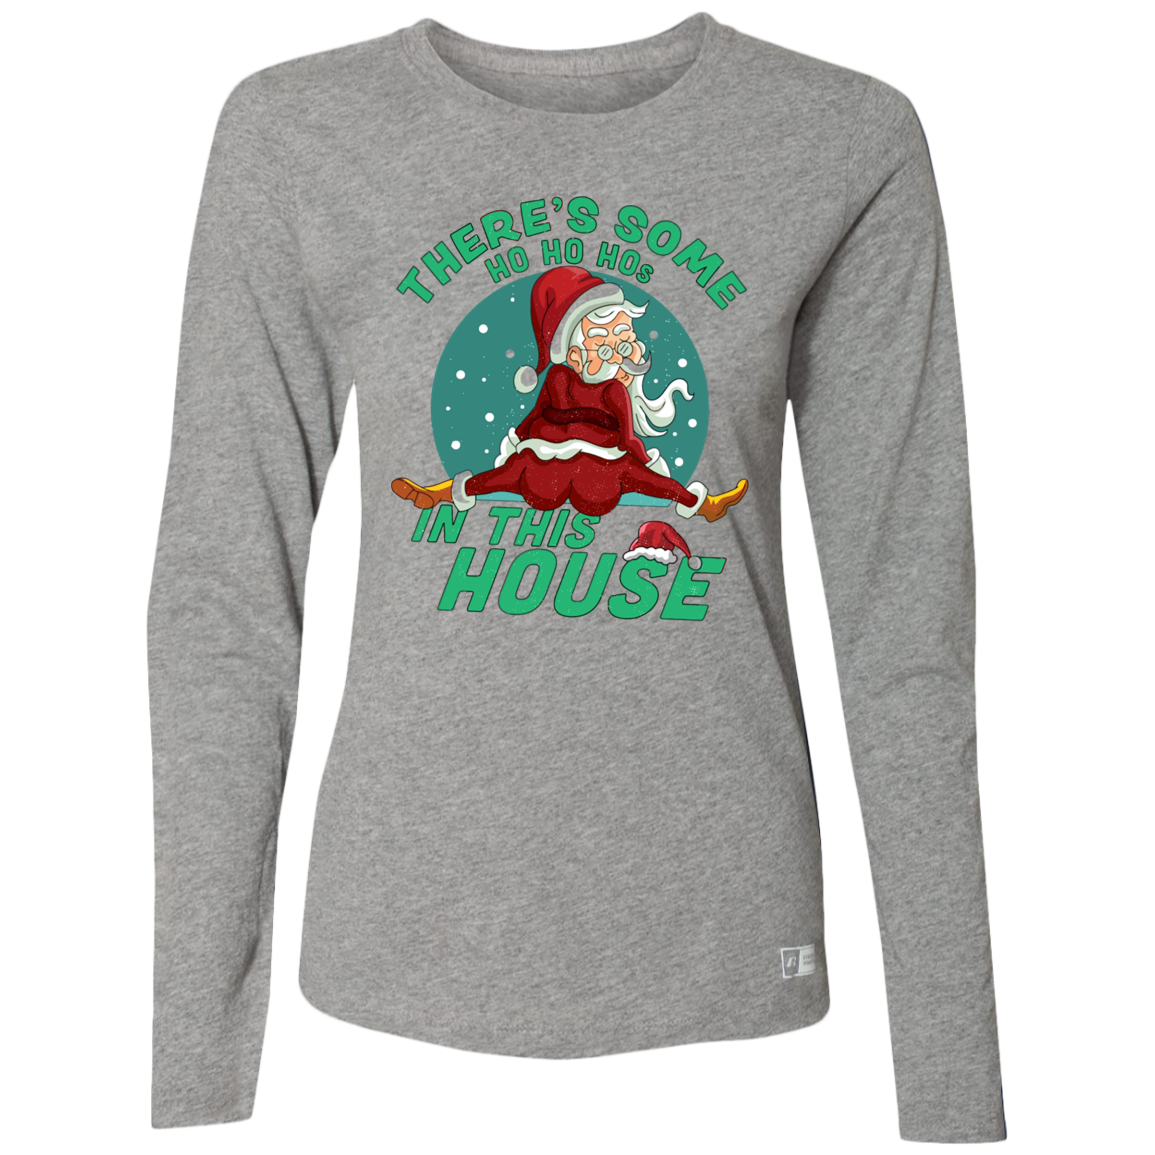 THERE'S SOME HO HO HO'S IN THIS HOUSE ESSENTIAL DRI-POWER LONG SLEEVE T-SHIRT